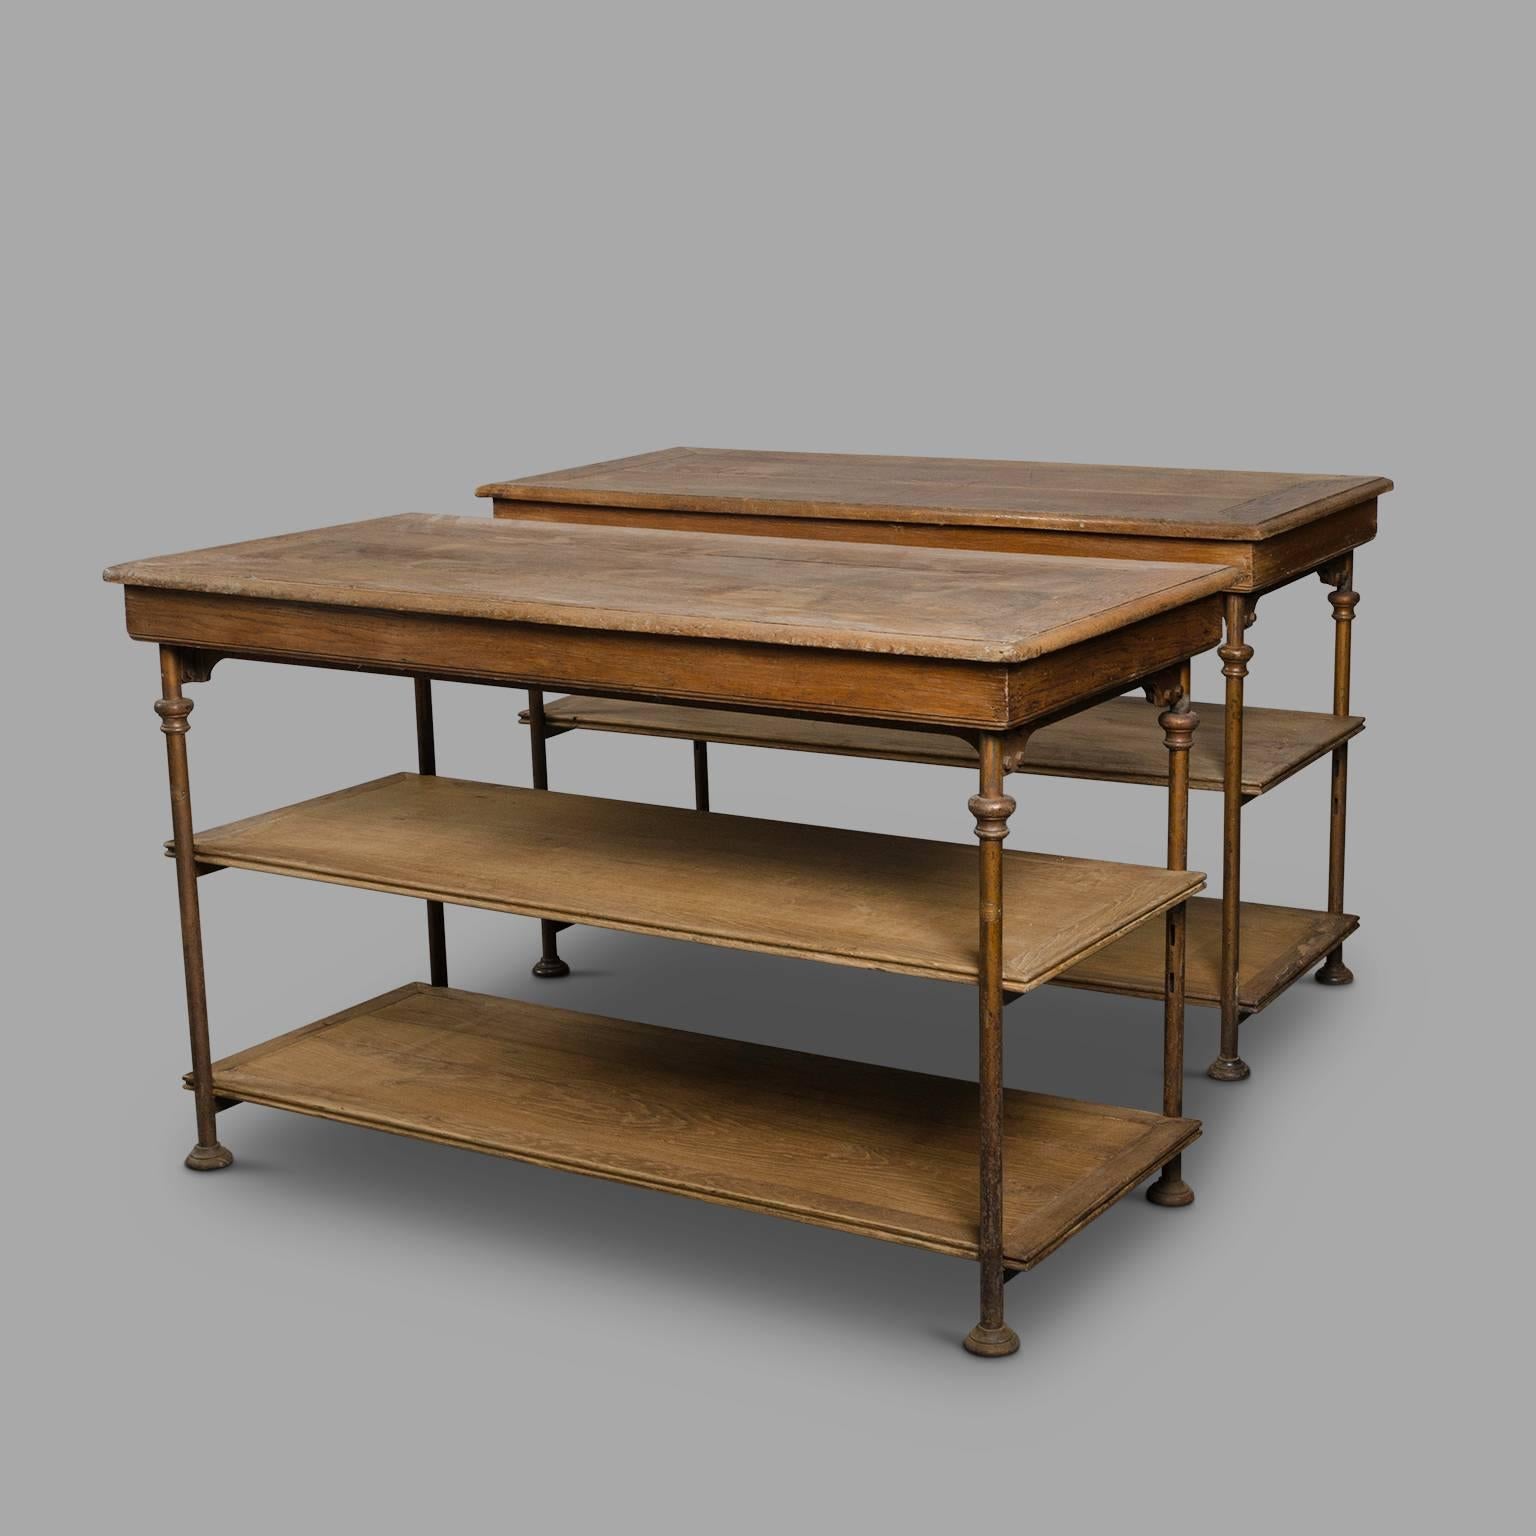 Metal structure and oak tops. Original color and patina. Both bearing the name of the manufacturer: TH. SCHERF 49 rue Lauriston, Paris.
Three adjustable height position for the intermediate tray.